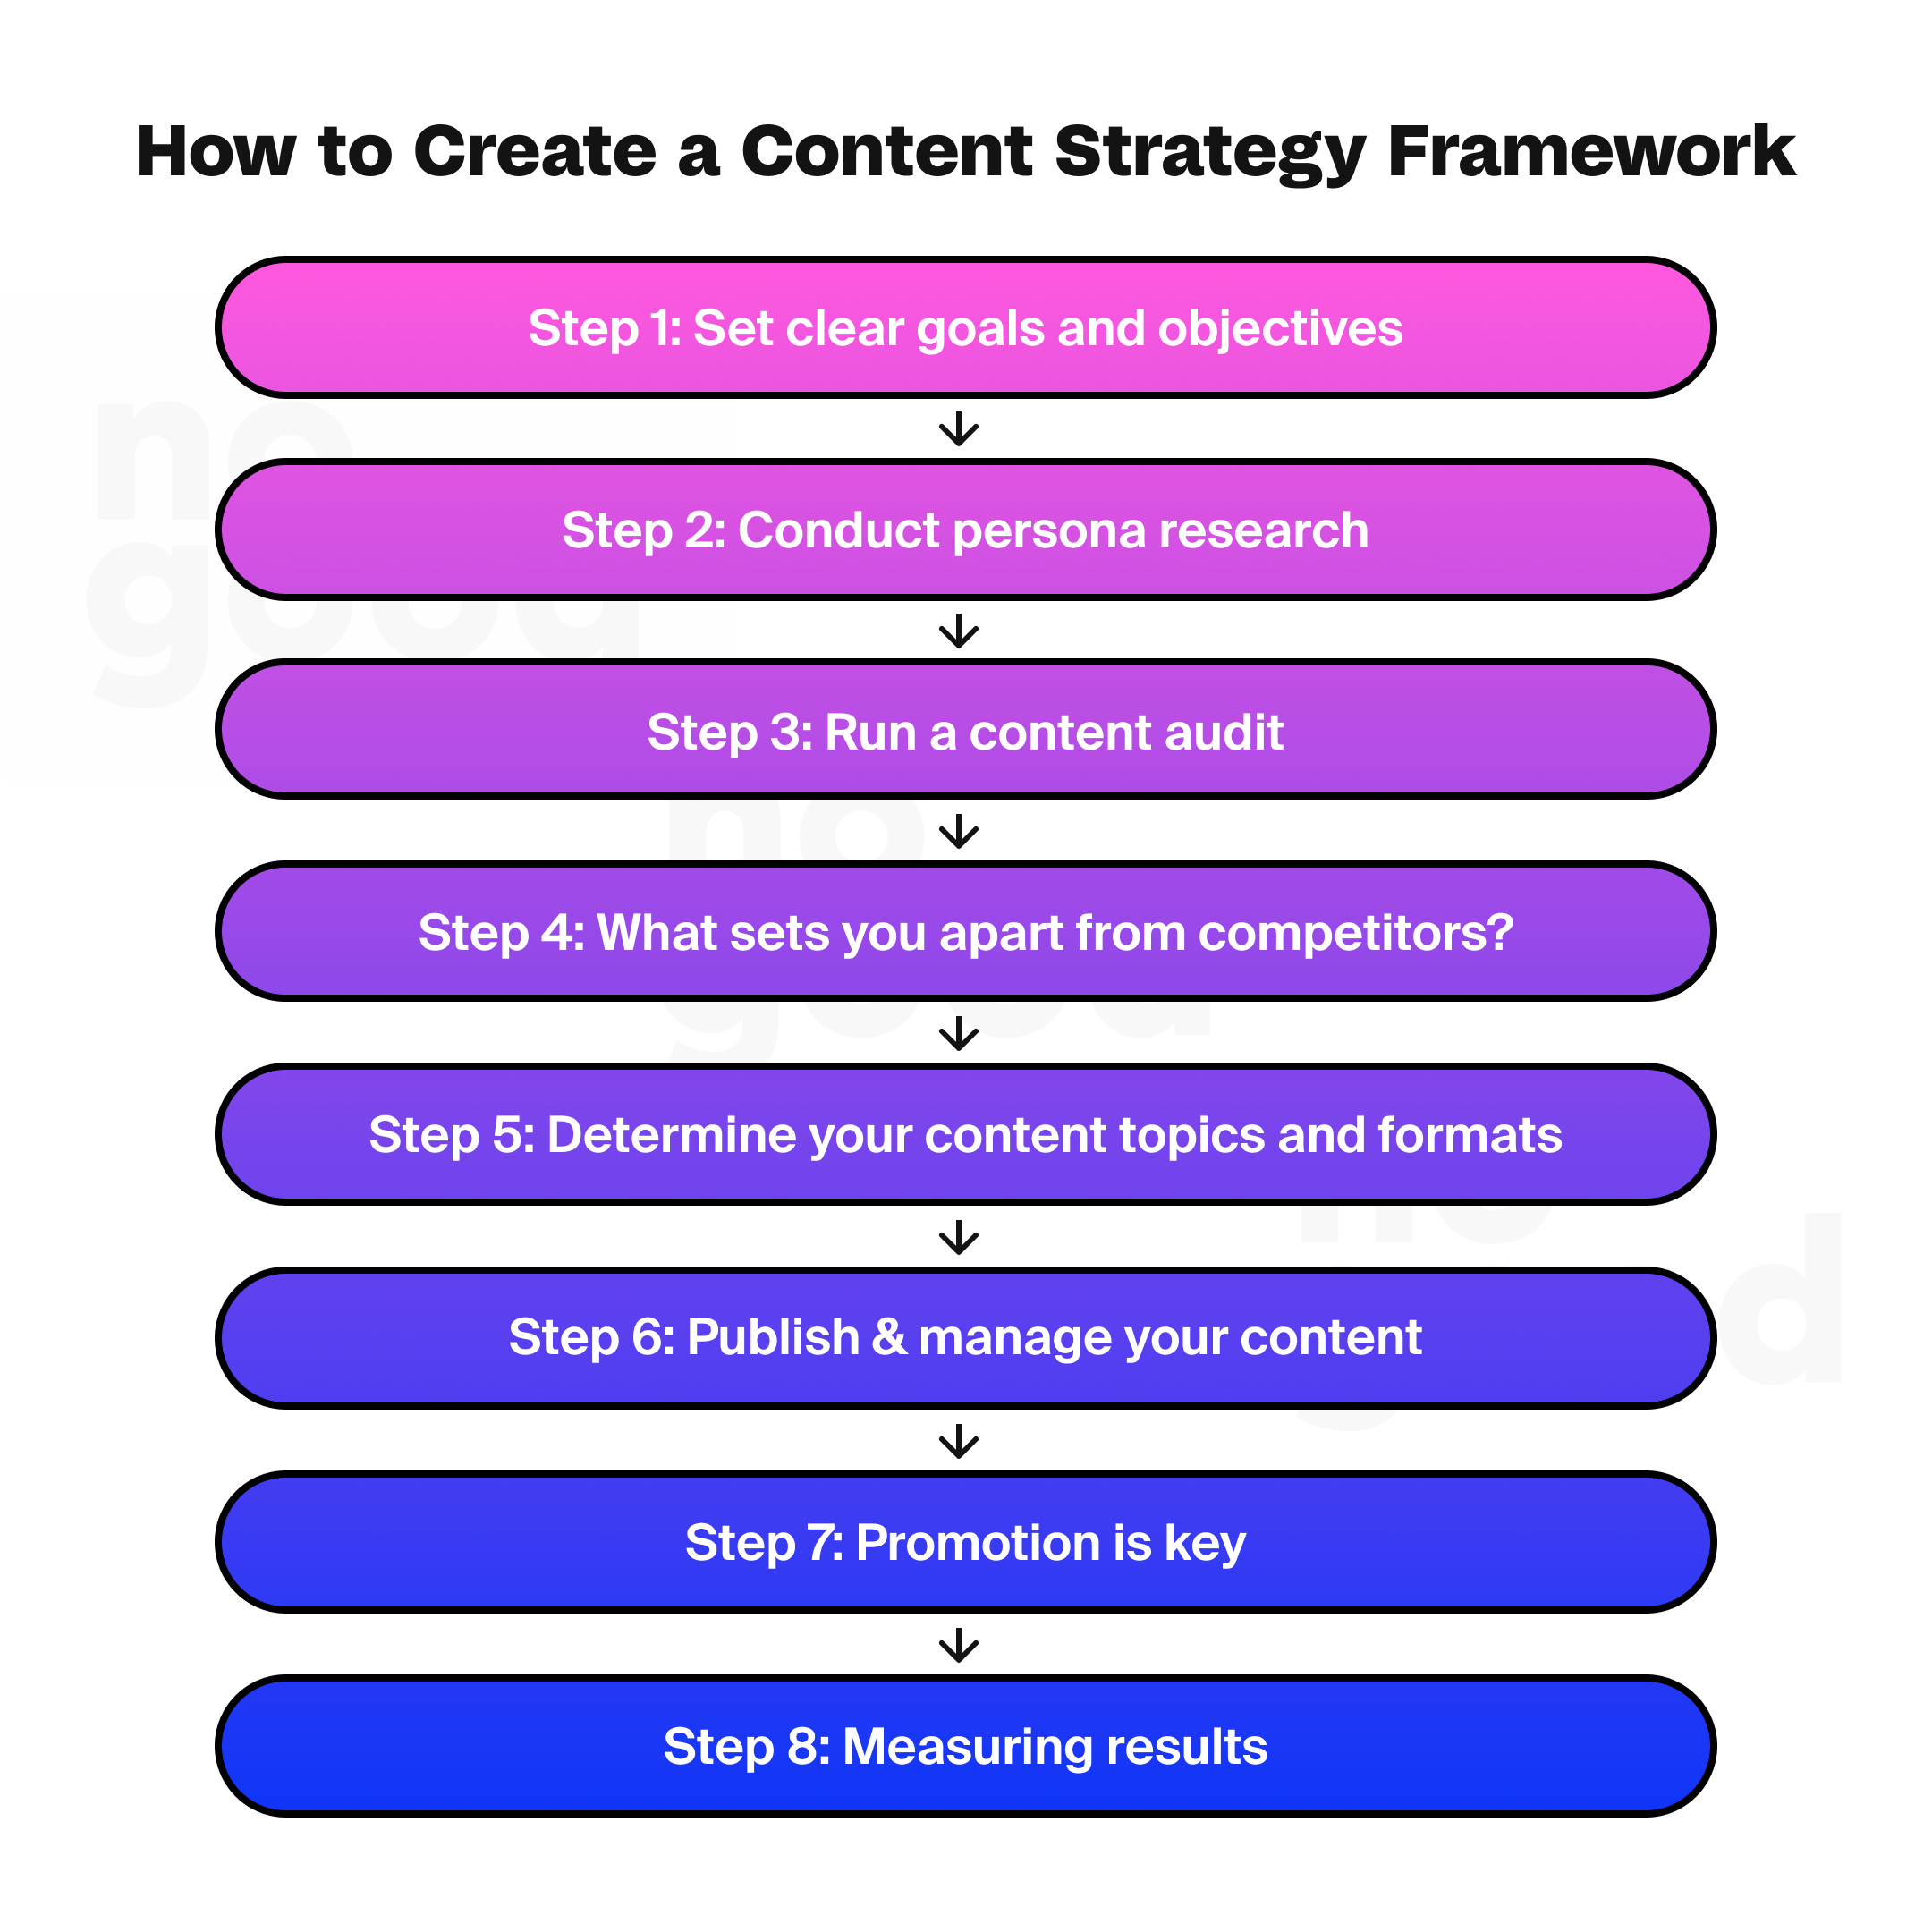 The steps to create a content strategy framework